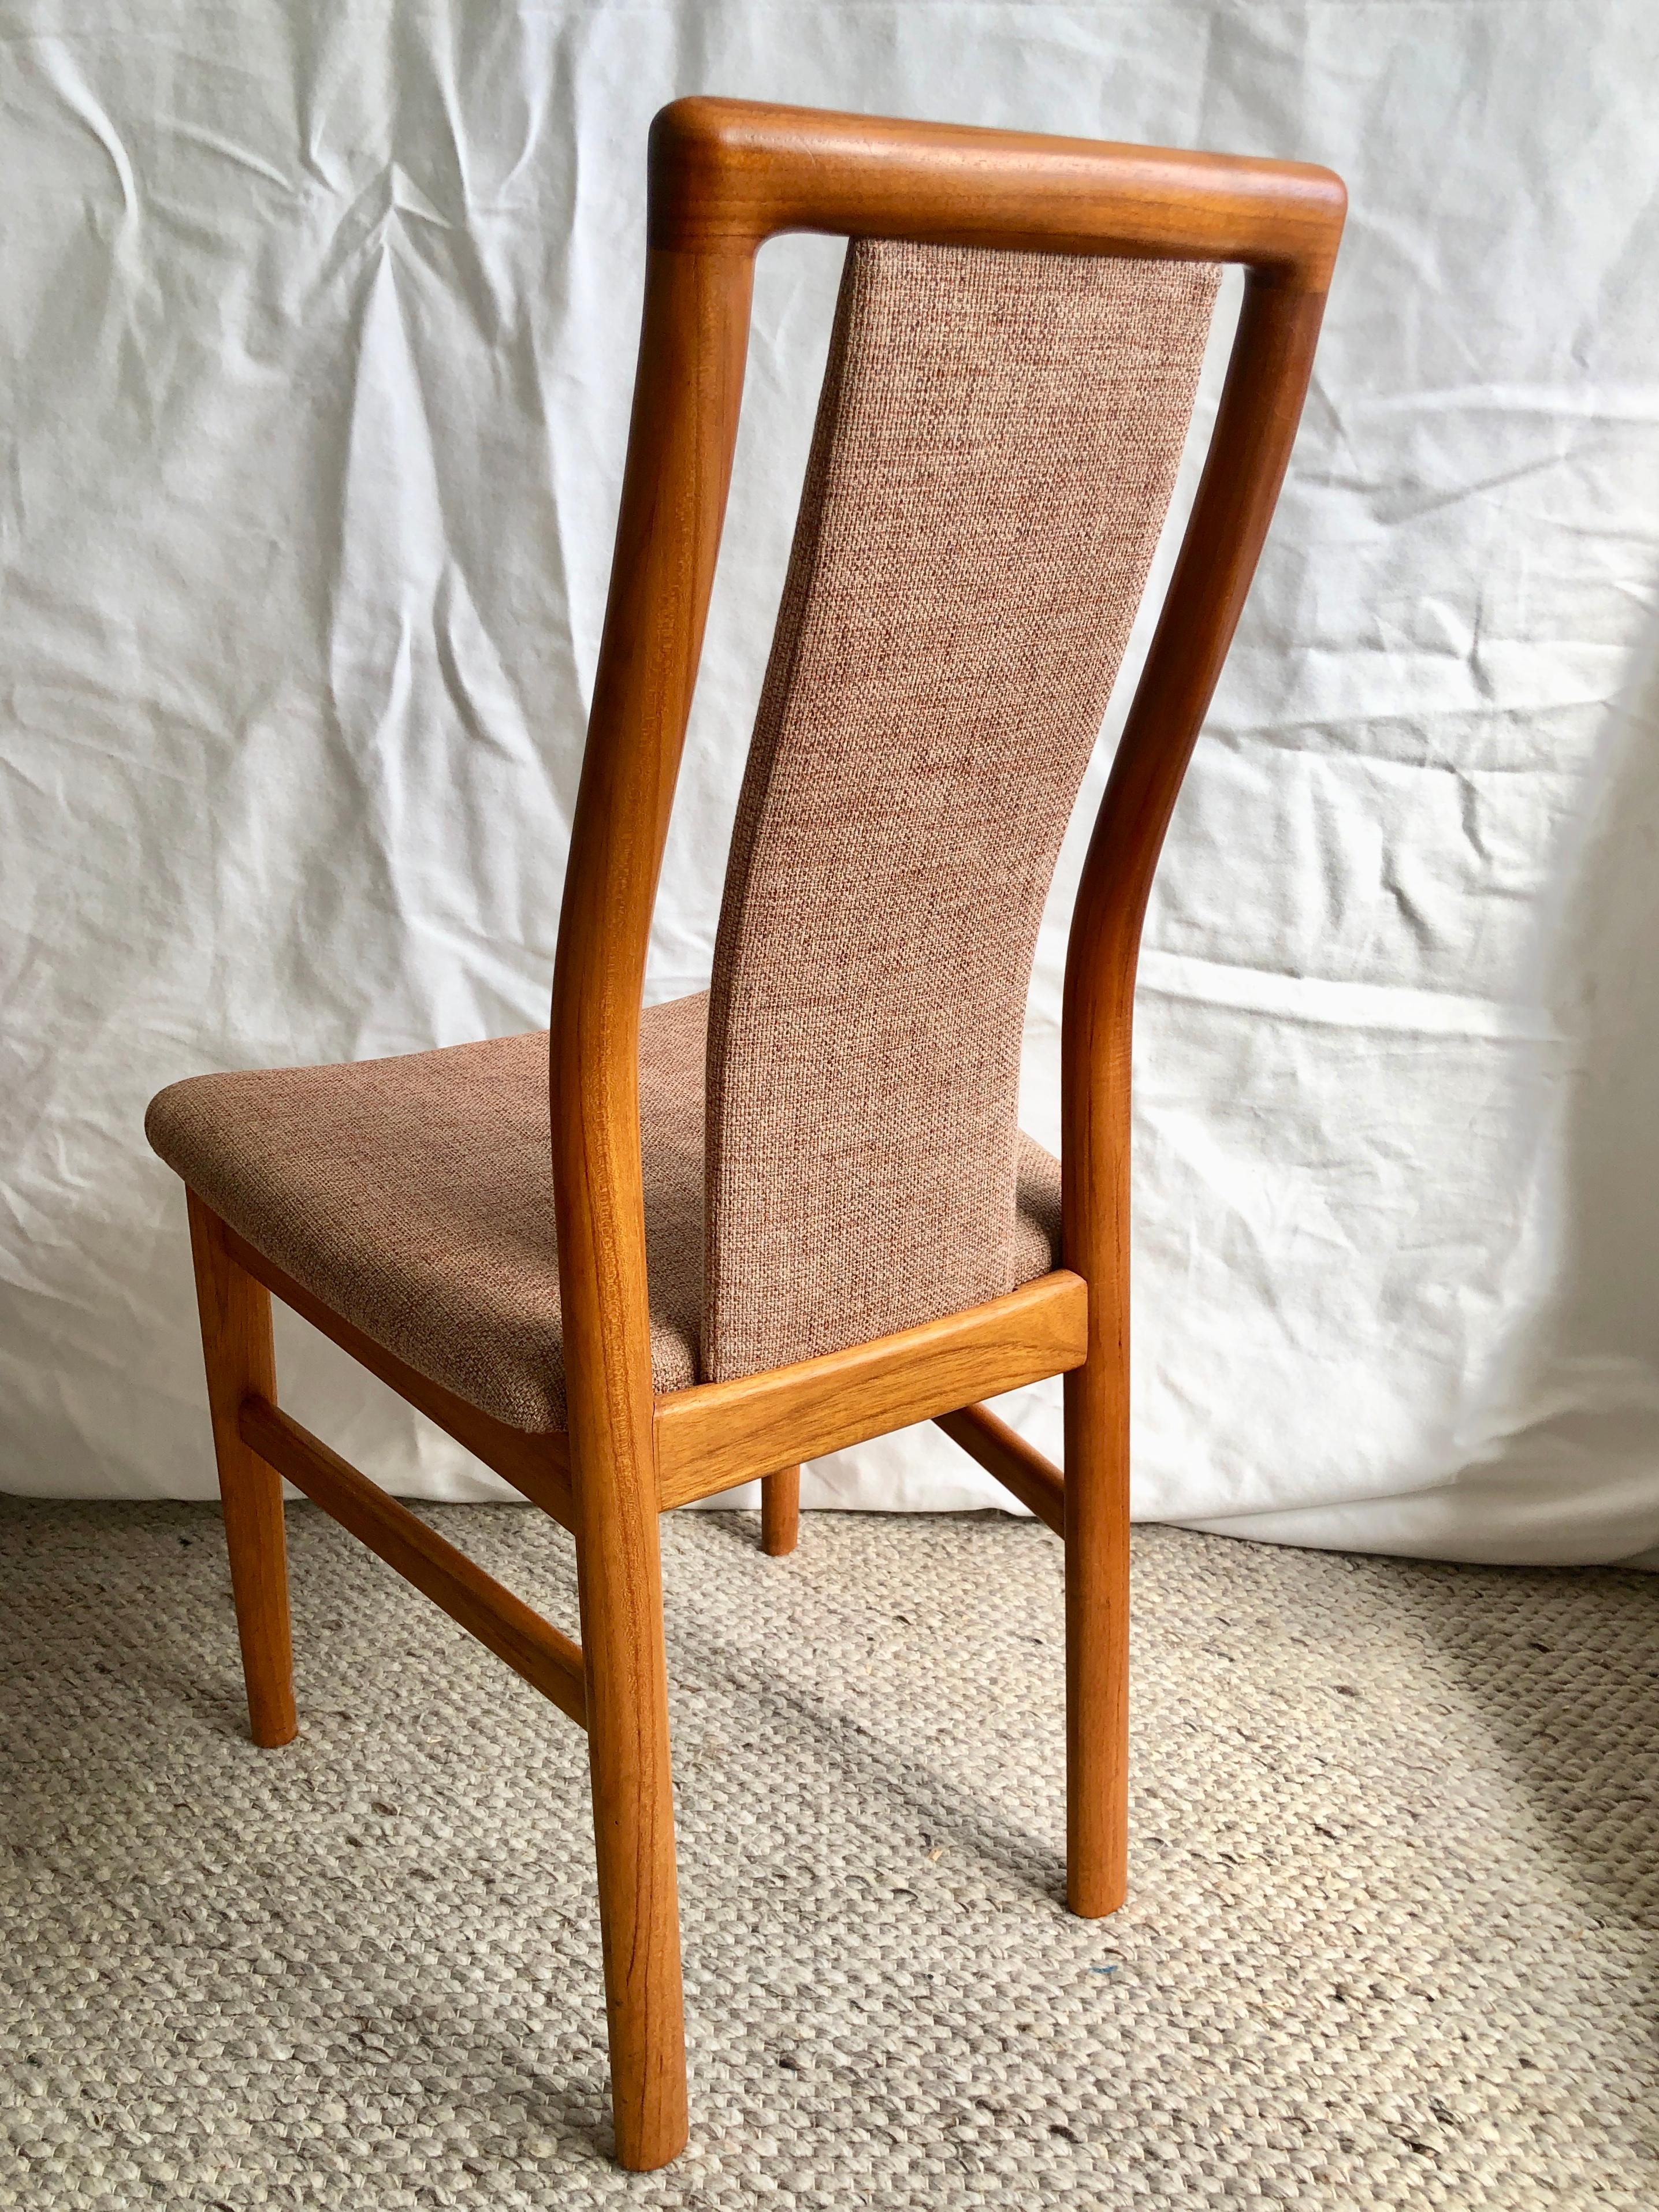 Hand-Crafted Set of 3 Teak Dining Chairs by Kai Kristiansen Schou Andersen, Denmark, 1970s For Sale